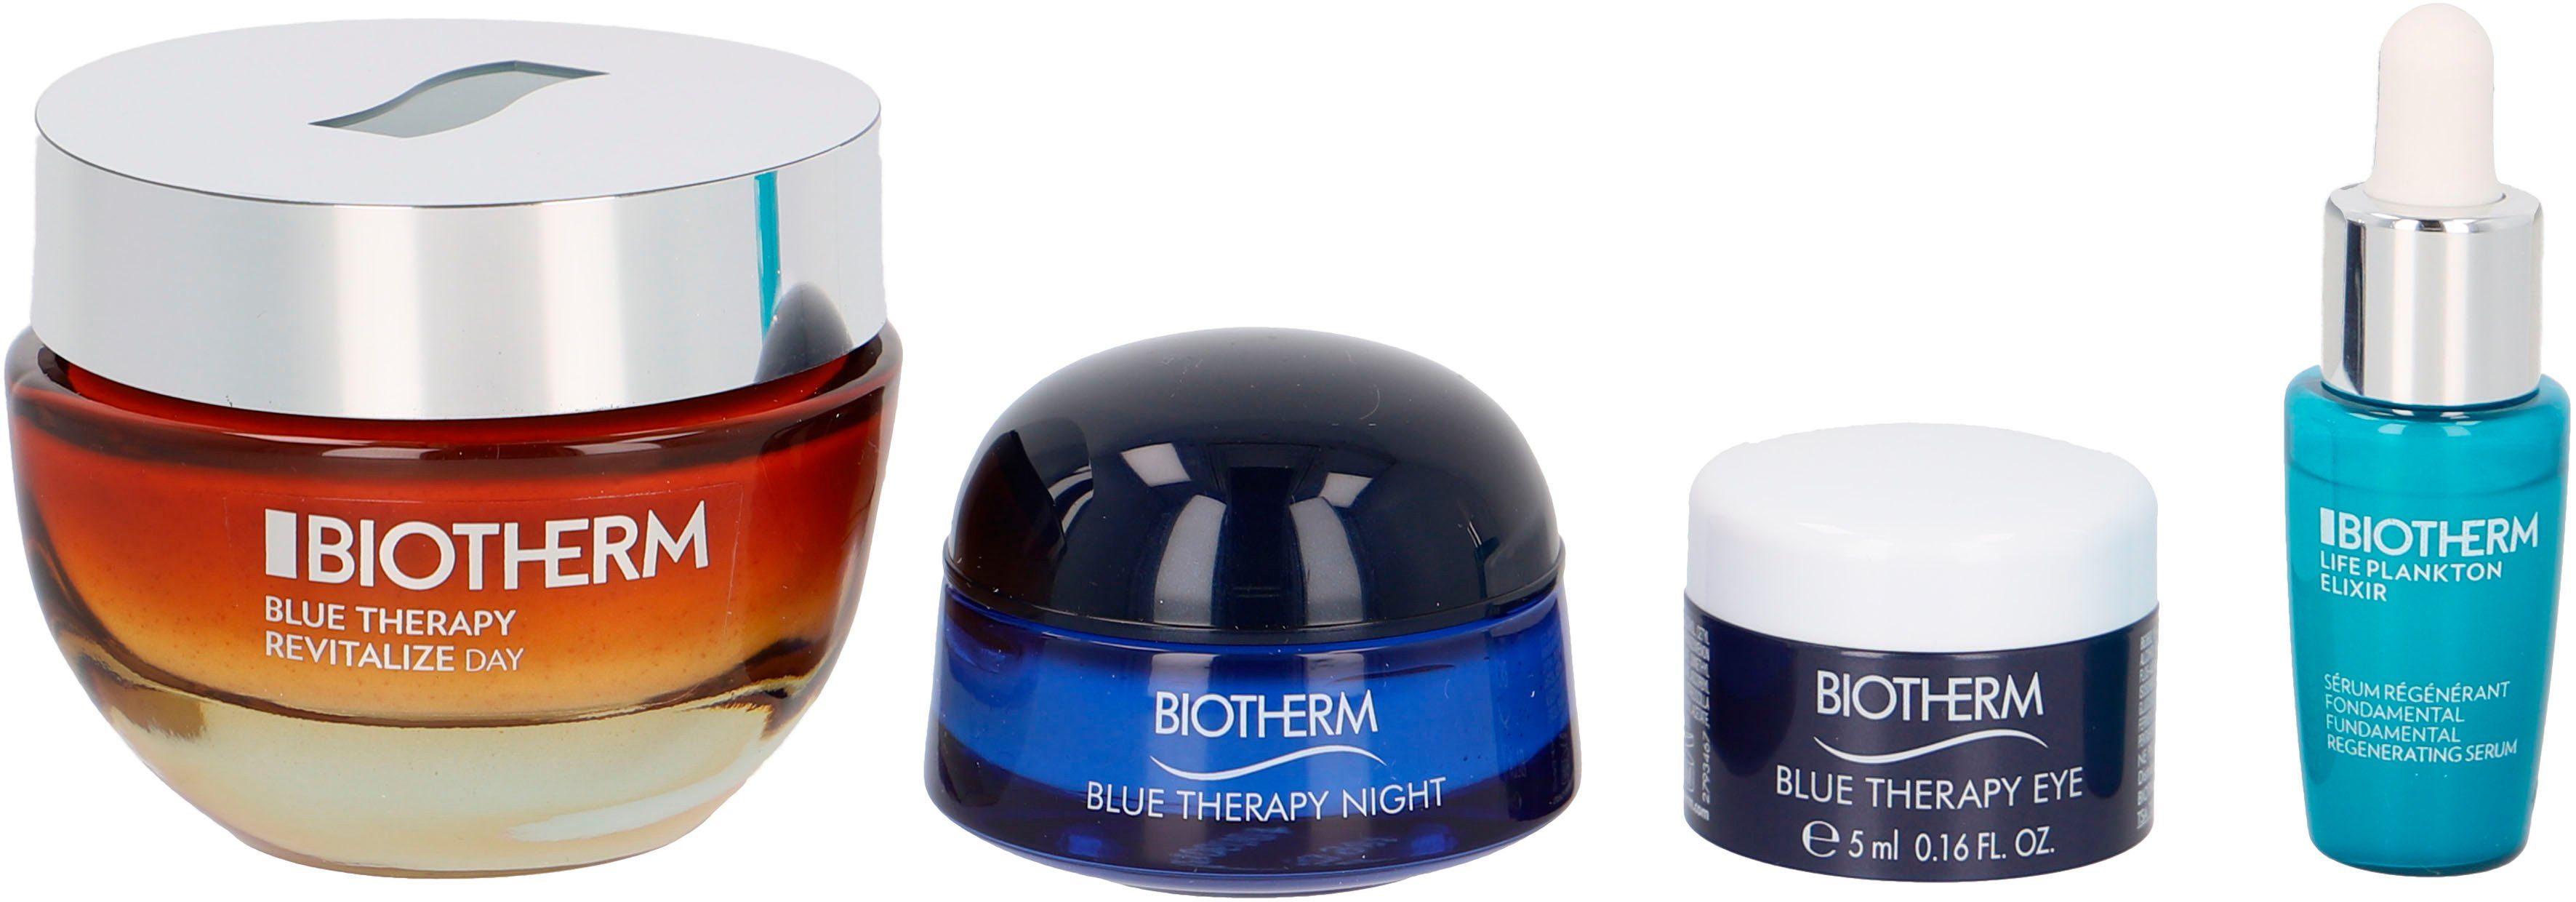 BIOTHERM Gesichtspflege-Set Blue Therapy Revitalize Cream Day Value Set, 4